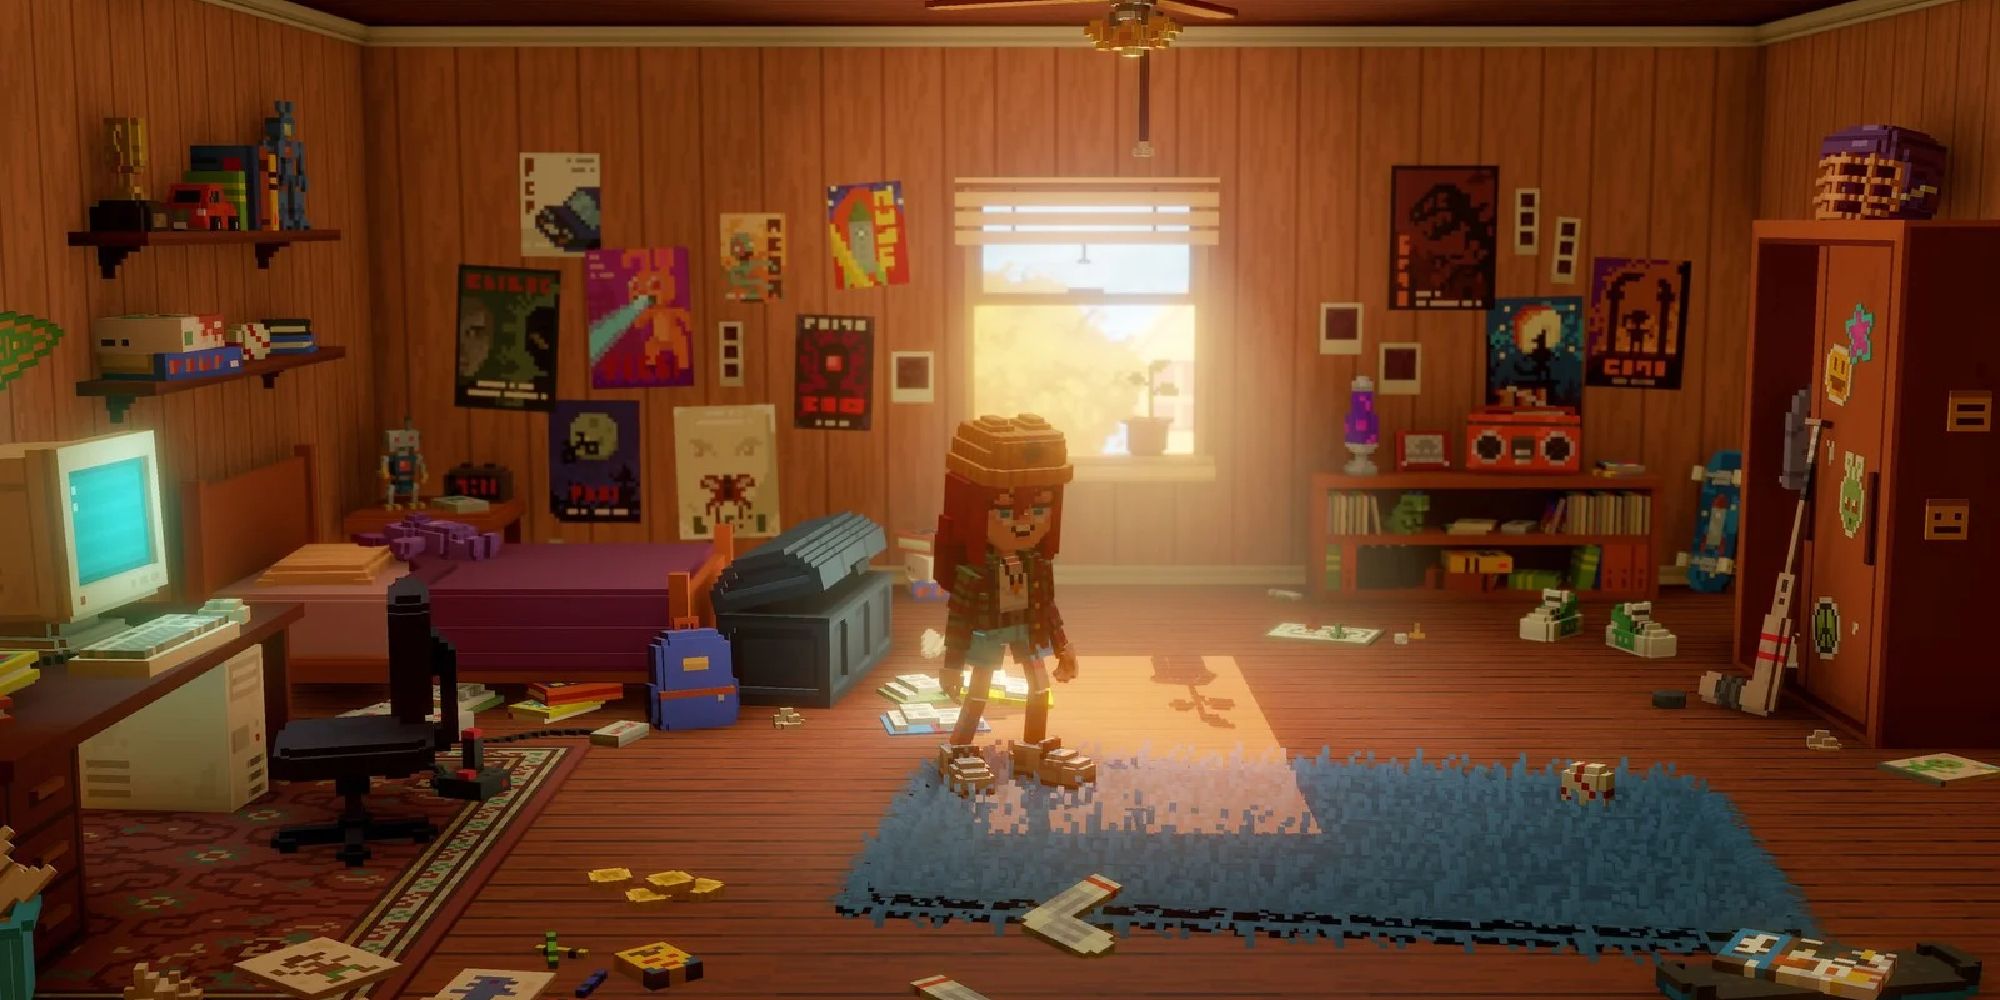 The player character stands in her messy bedroom in Echo Generation